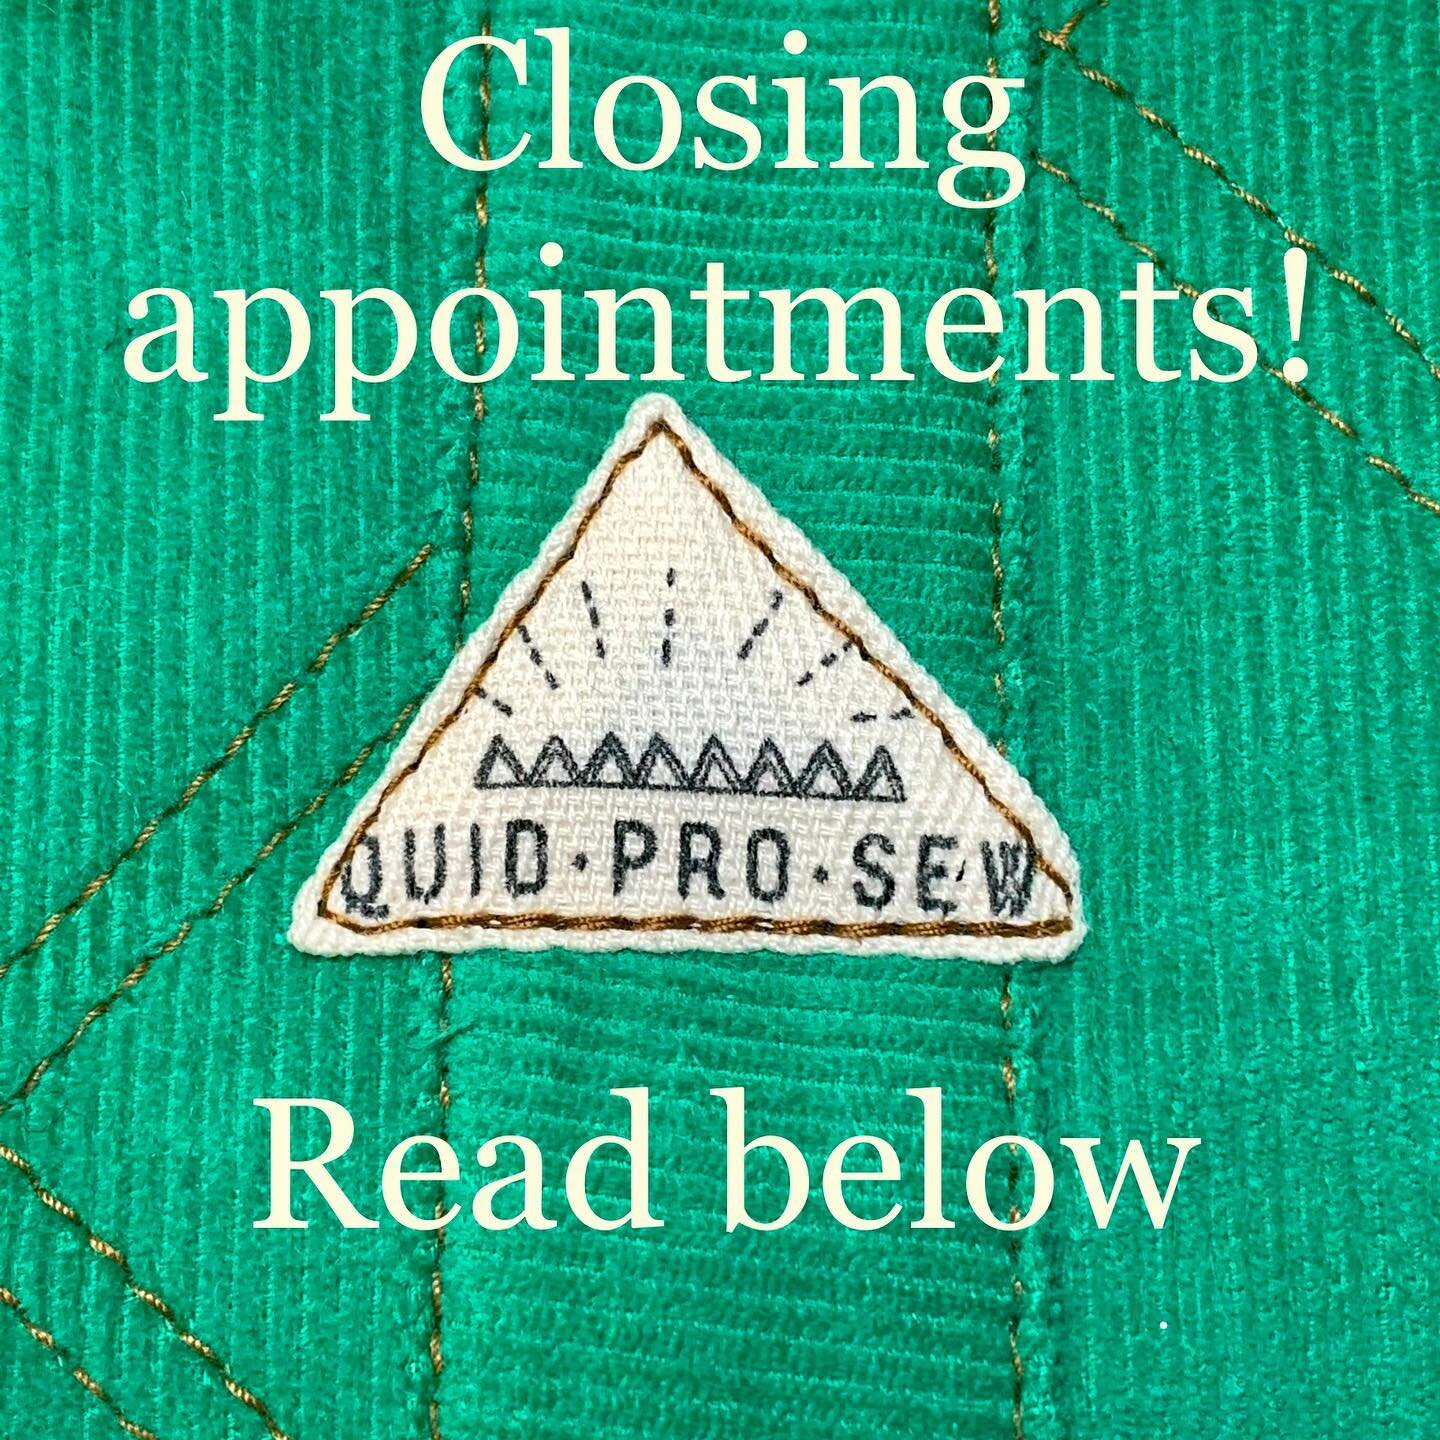 📣📣📣📣📣
 Please read all of the following 
  for updates on the biz
 📣📣📣📣📣

Howdy y&rsquo;all! I wanted to let y&rsquo;all know that I am closing appointments for a *SHORT* time, (not as long as last time, I promise). A lot has happened recen